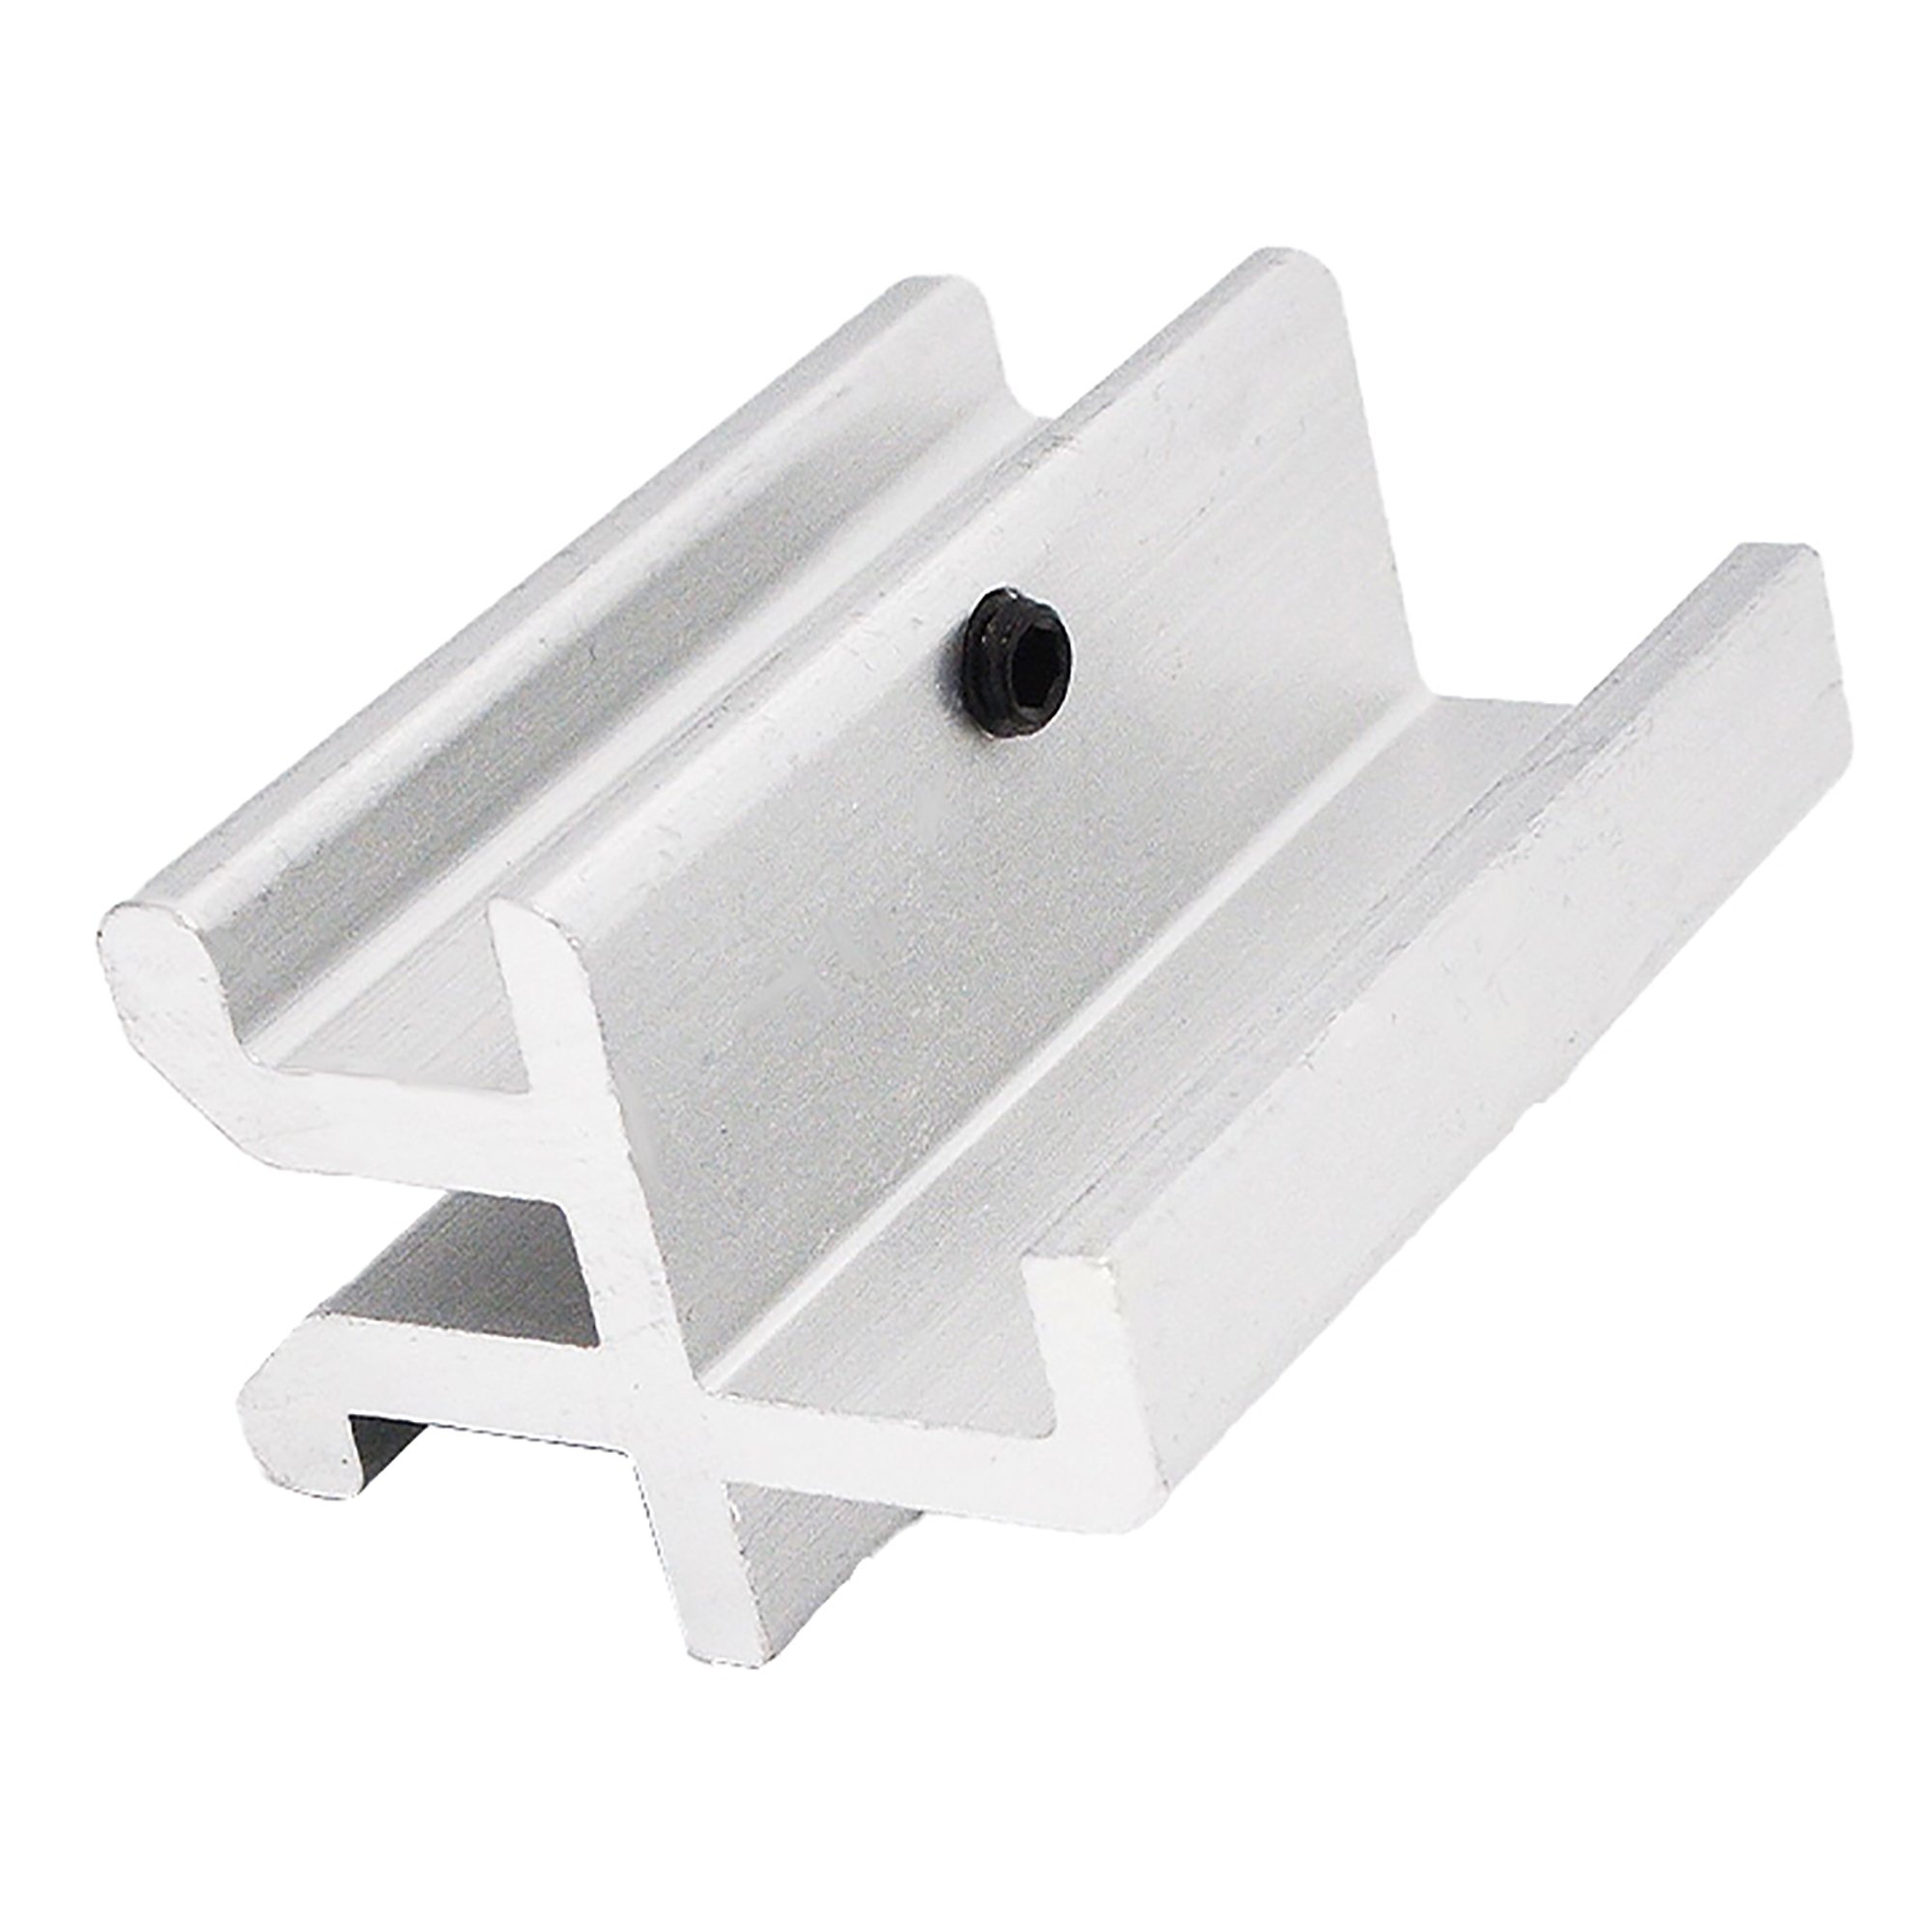 For T3 - Utility Track Bracket for Gladiator with Rail System, 1 Piece